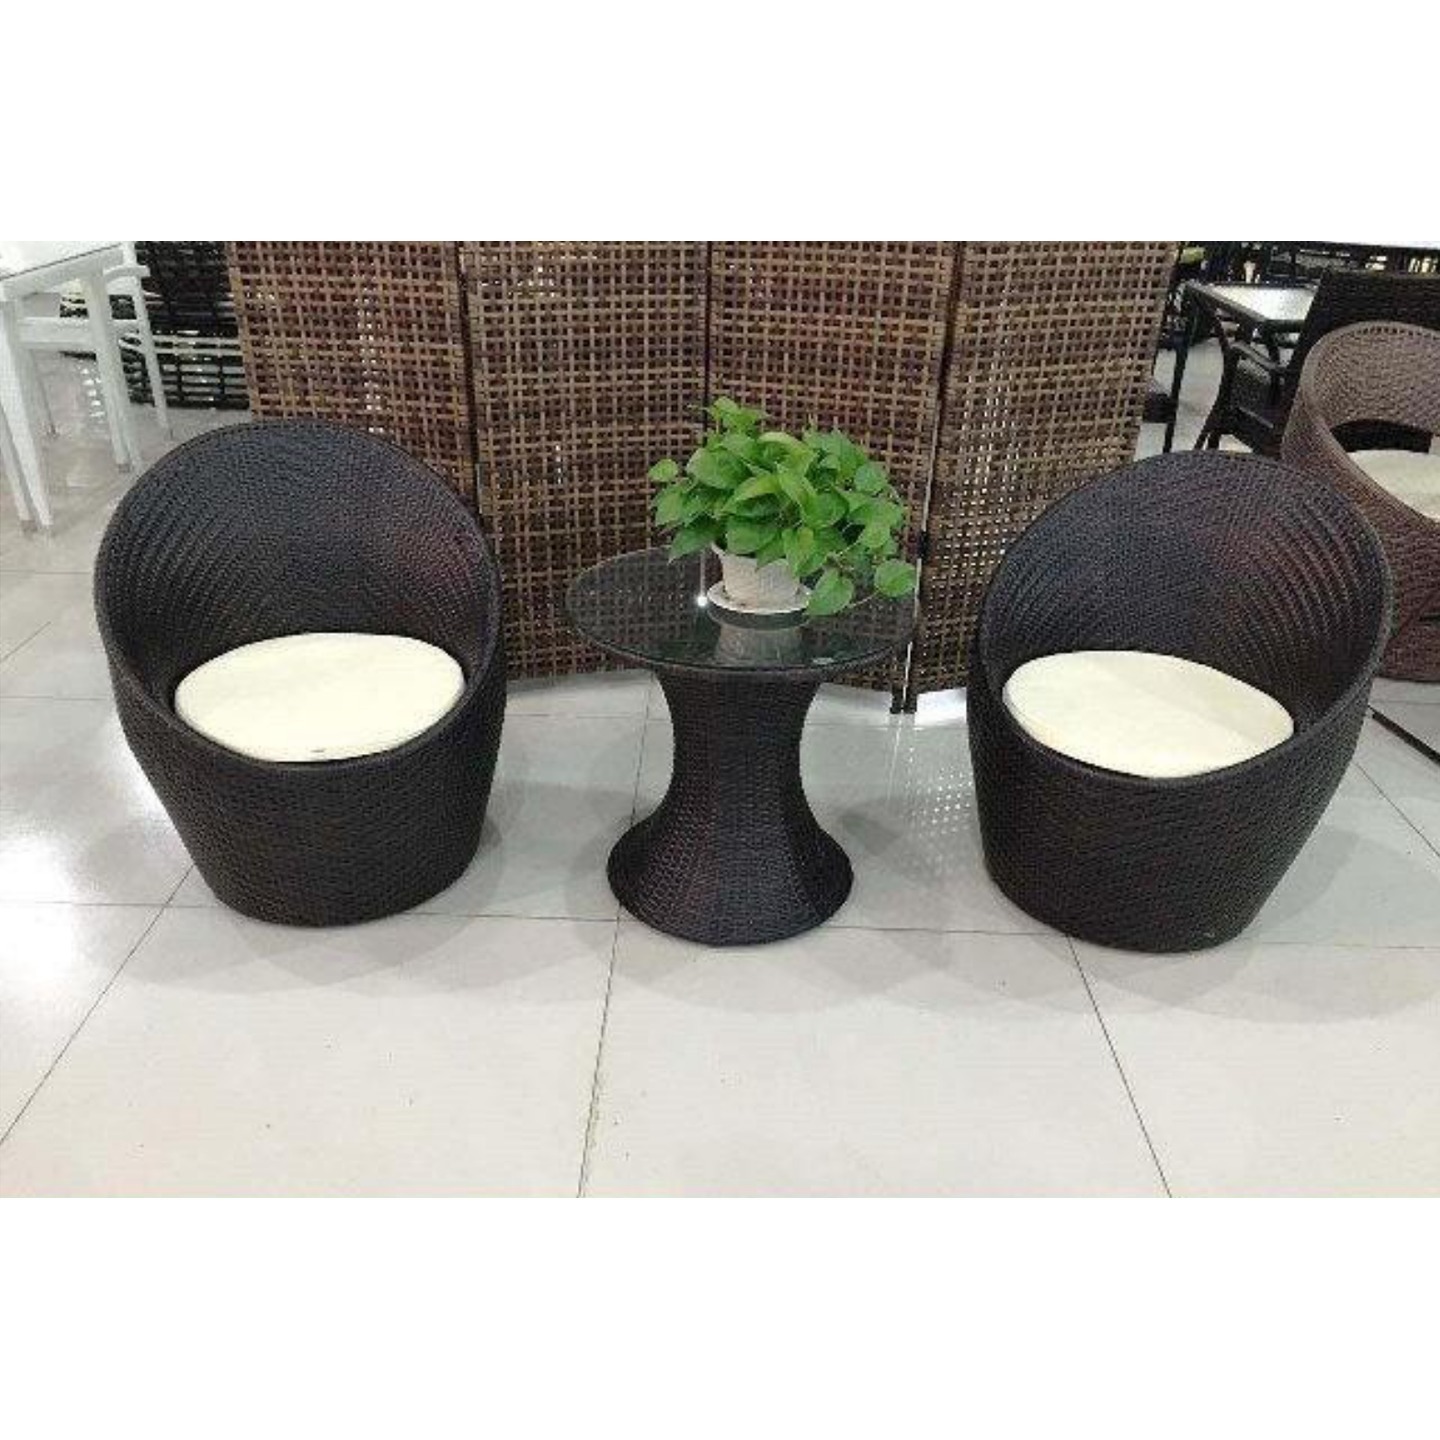 IHM Outdoor Dining Table 9999 Two Seater in Brown Colour